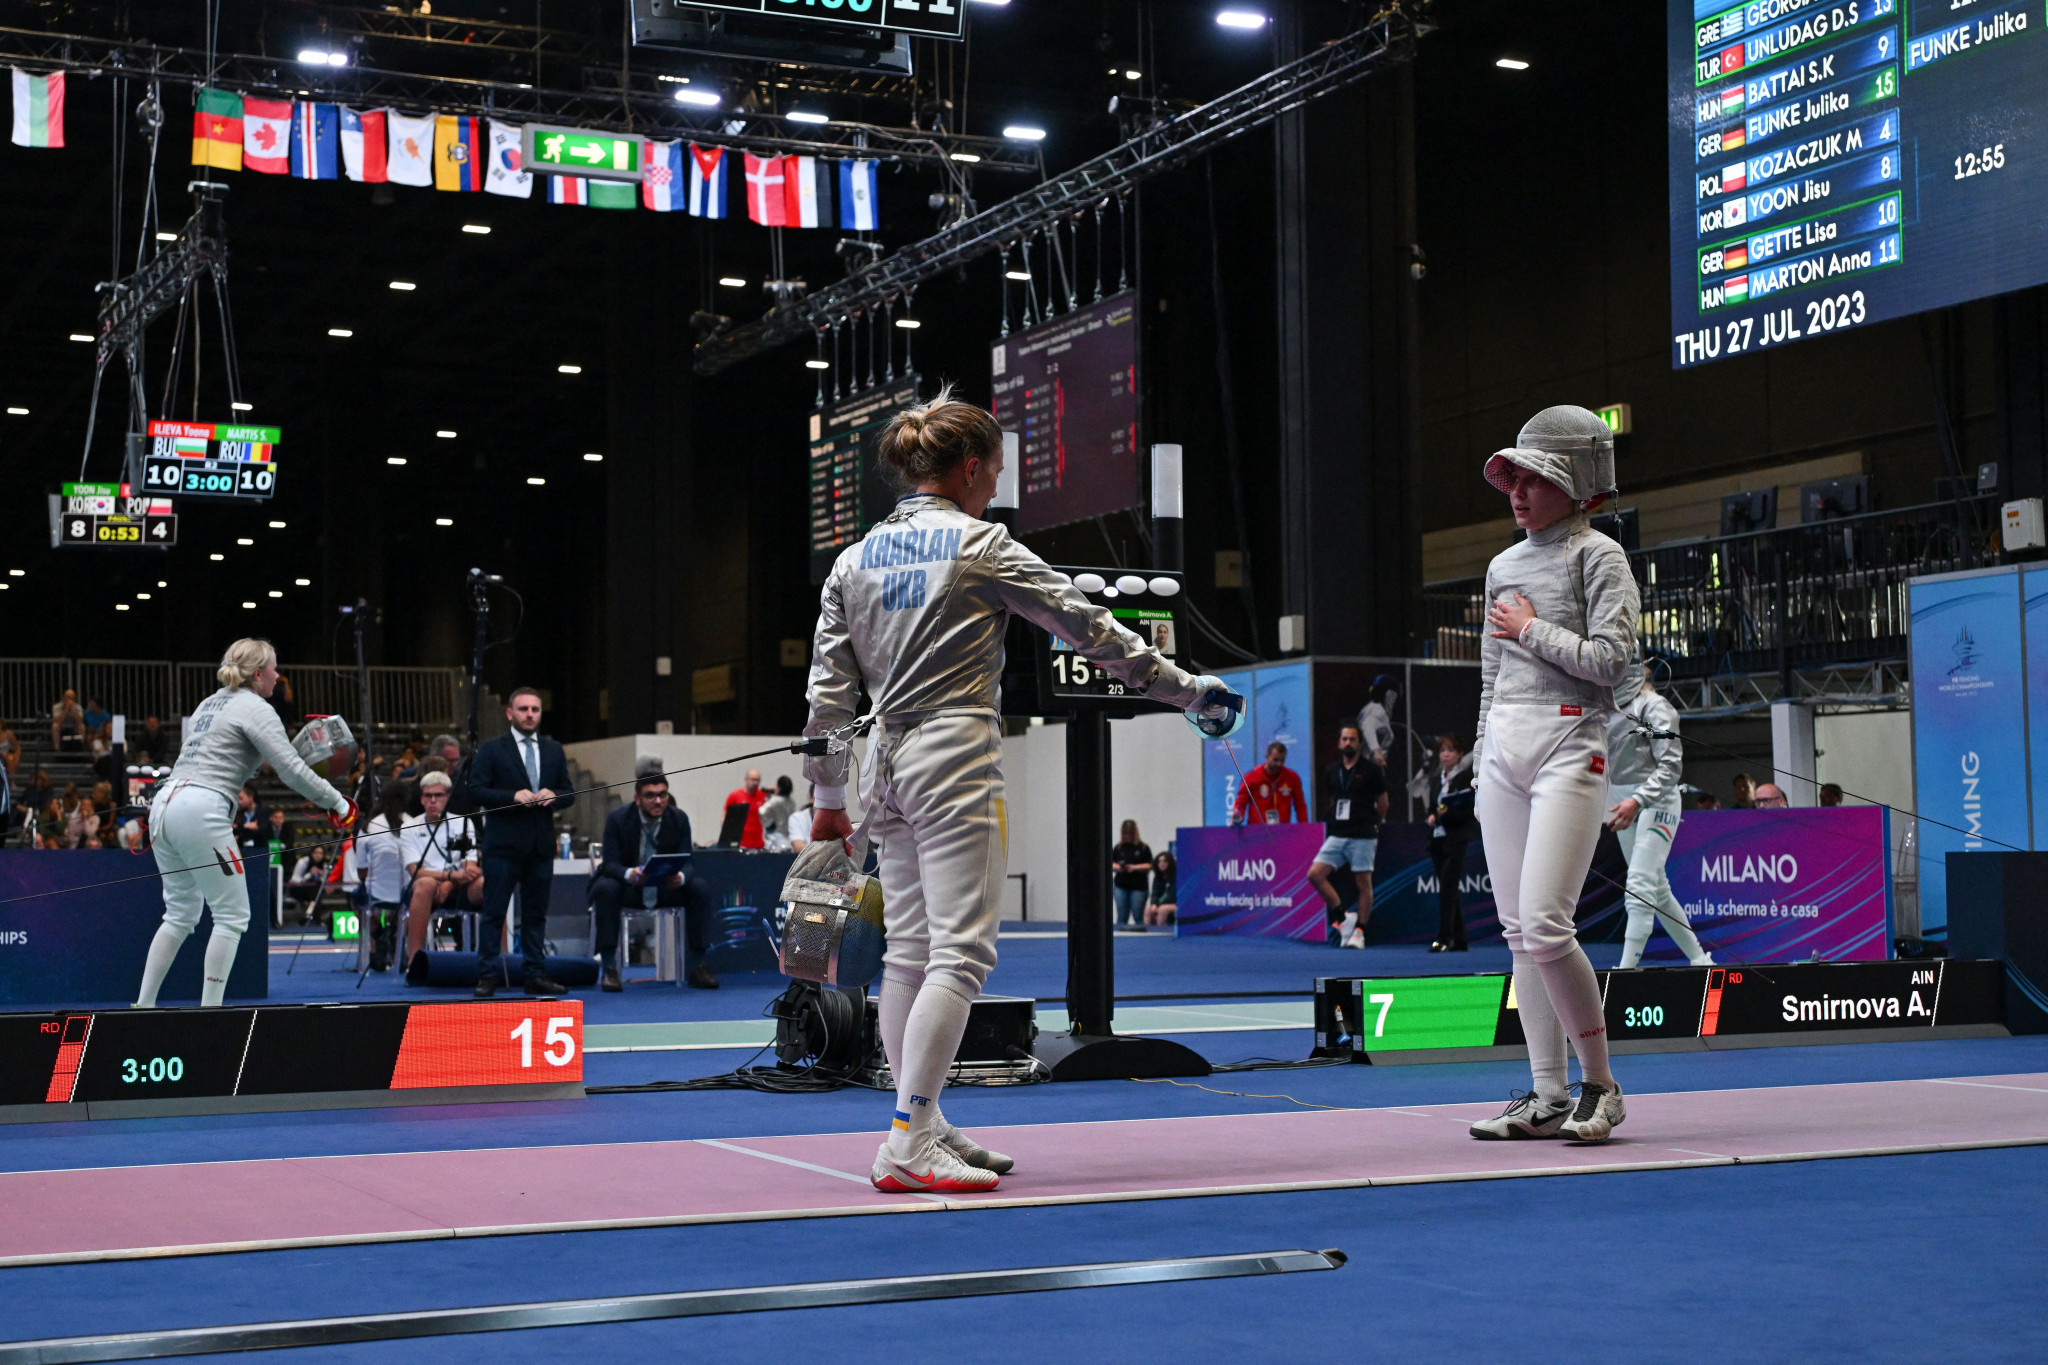 Ukrainian disqualified at Fencing World Championships after refusing handshake with Russian